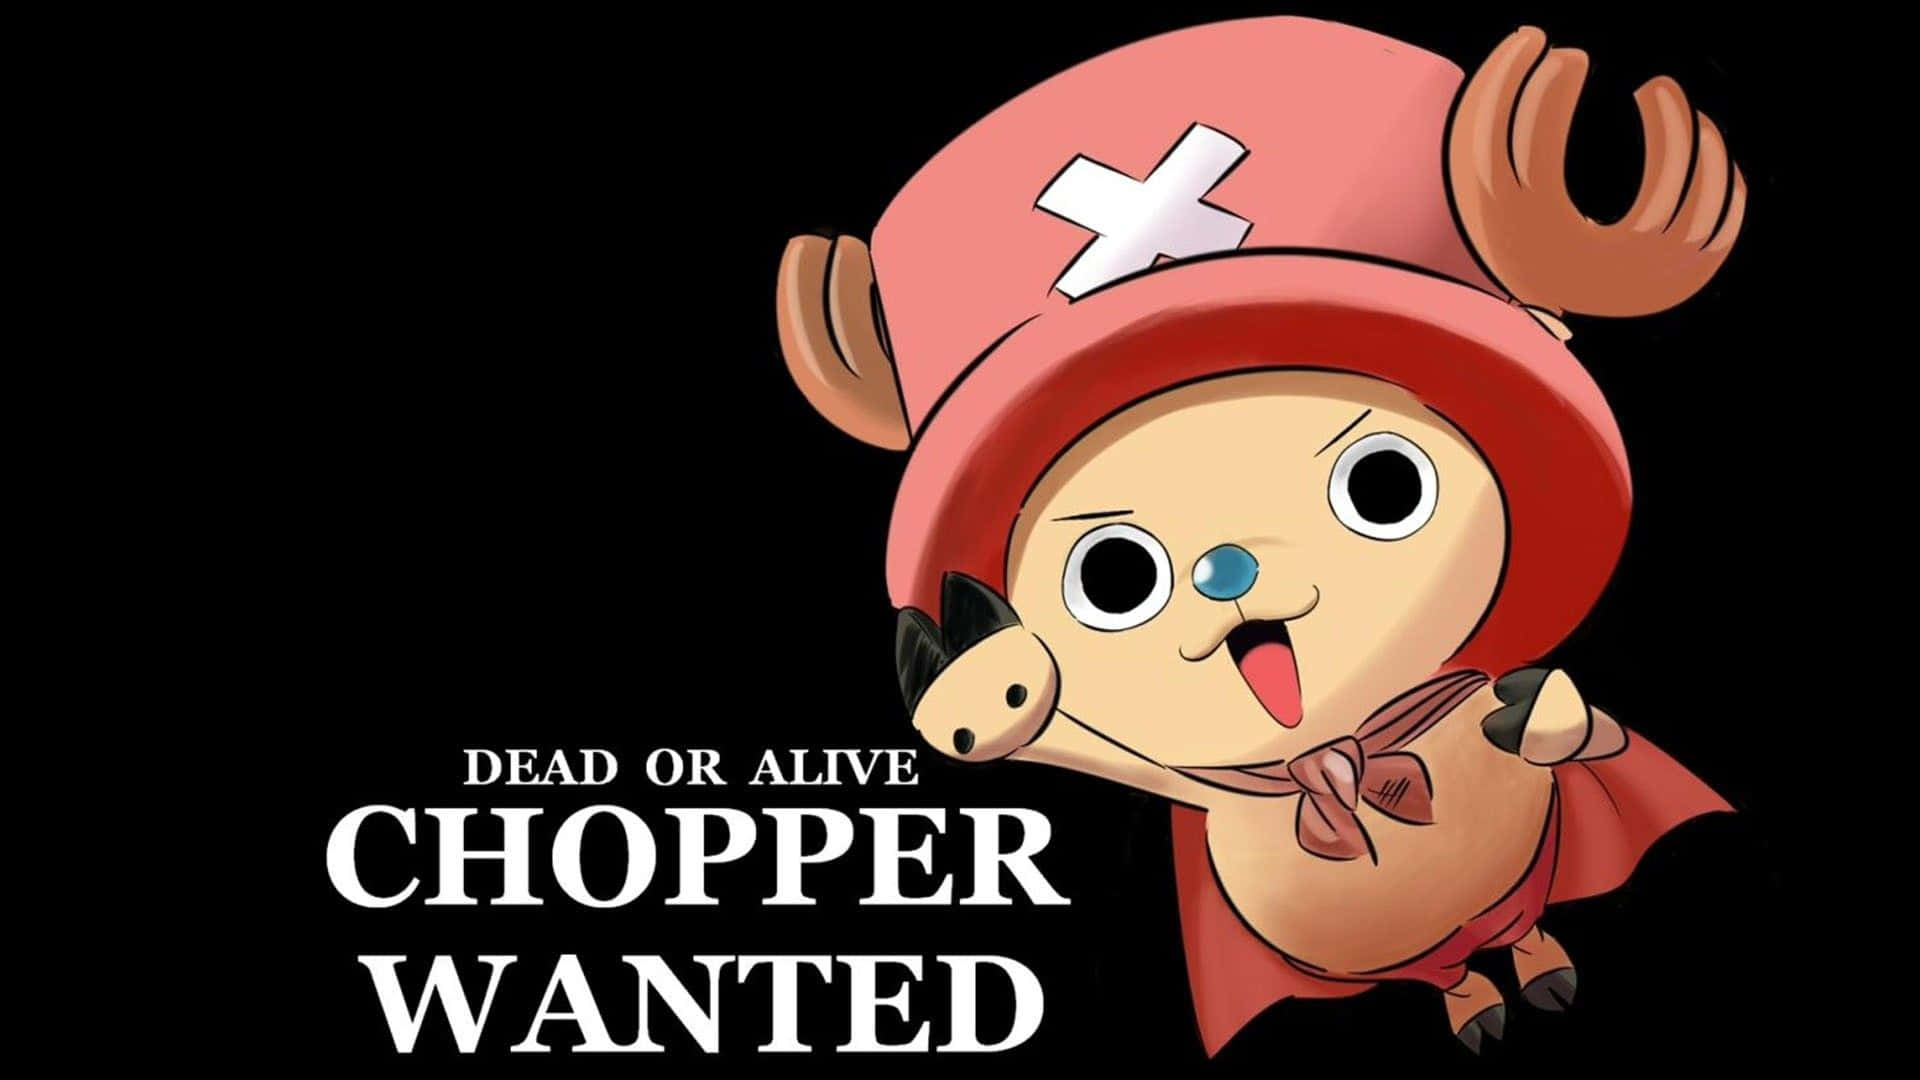 Dead Or Alive One Piece Chopper Wanted Wallpaper